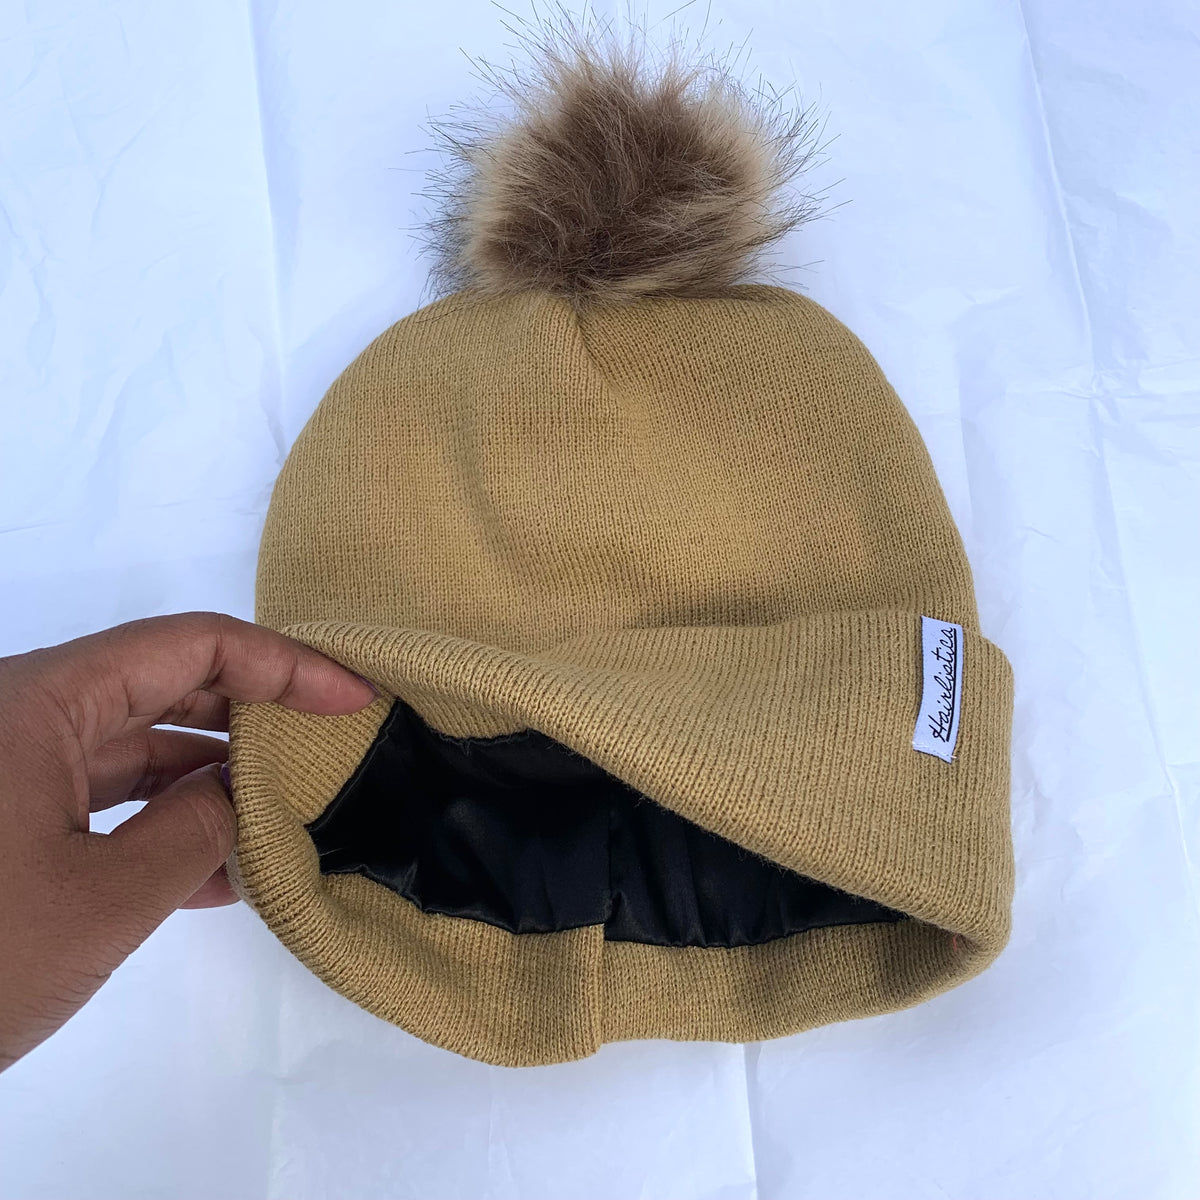 Satin lined beanie - Beige Hairlistica – with Pompom